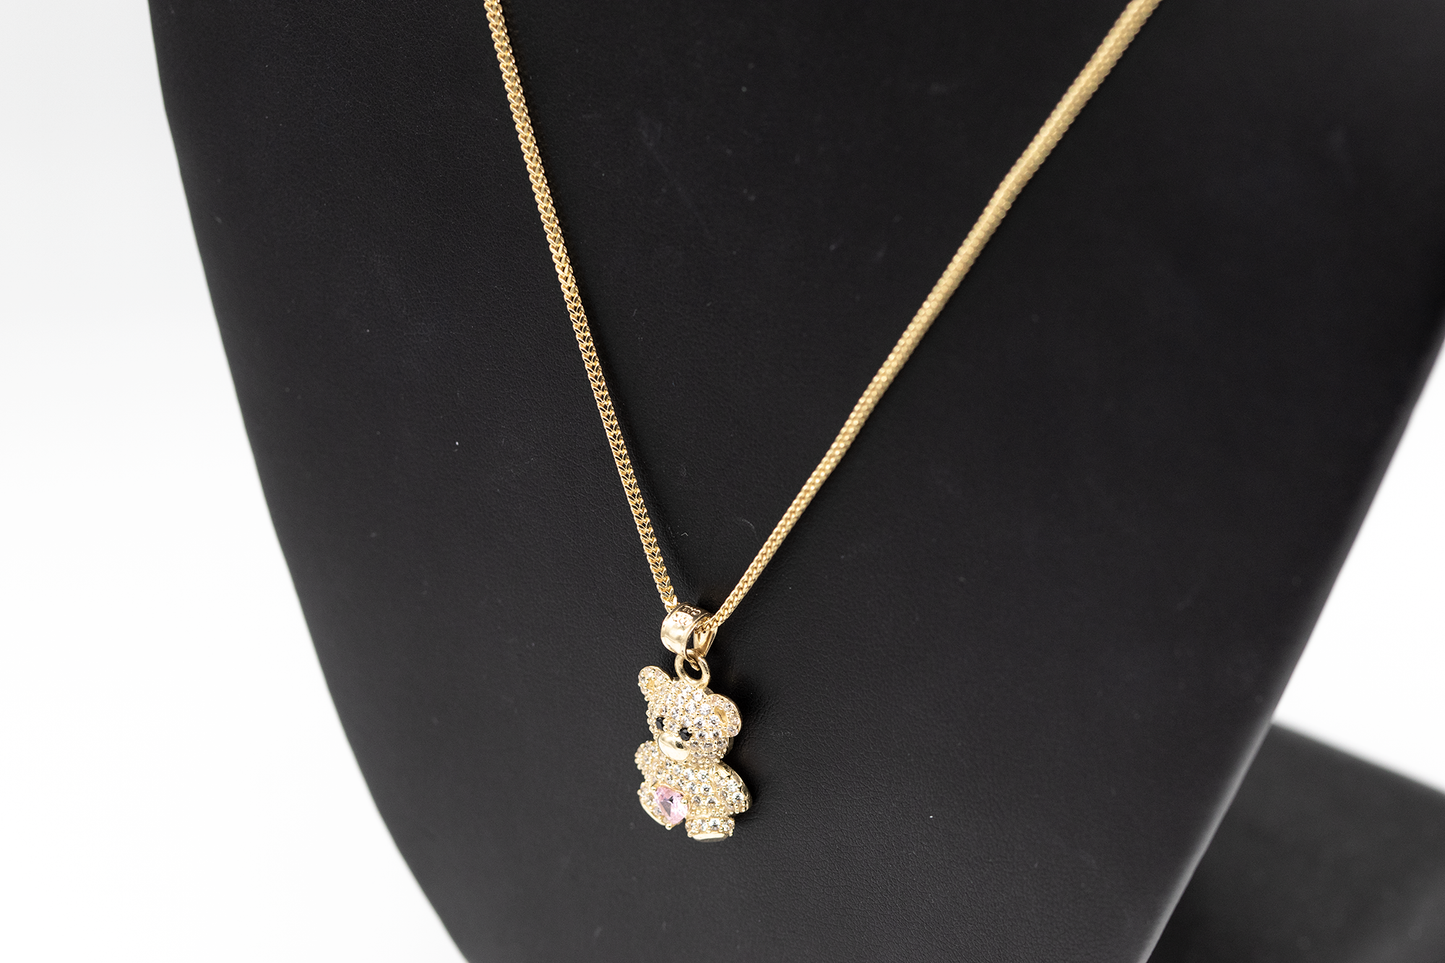 Charm pink bear design 10k gold and zirconia.